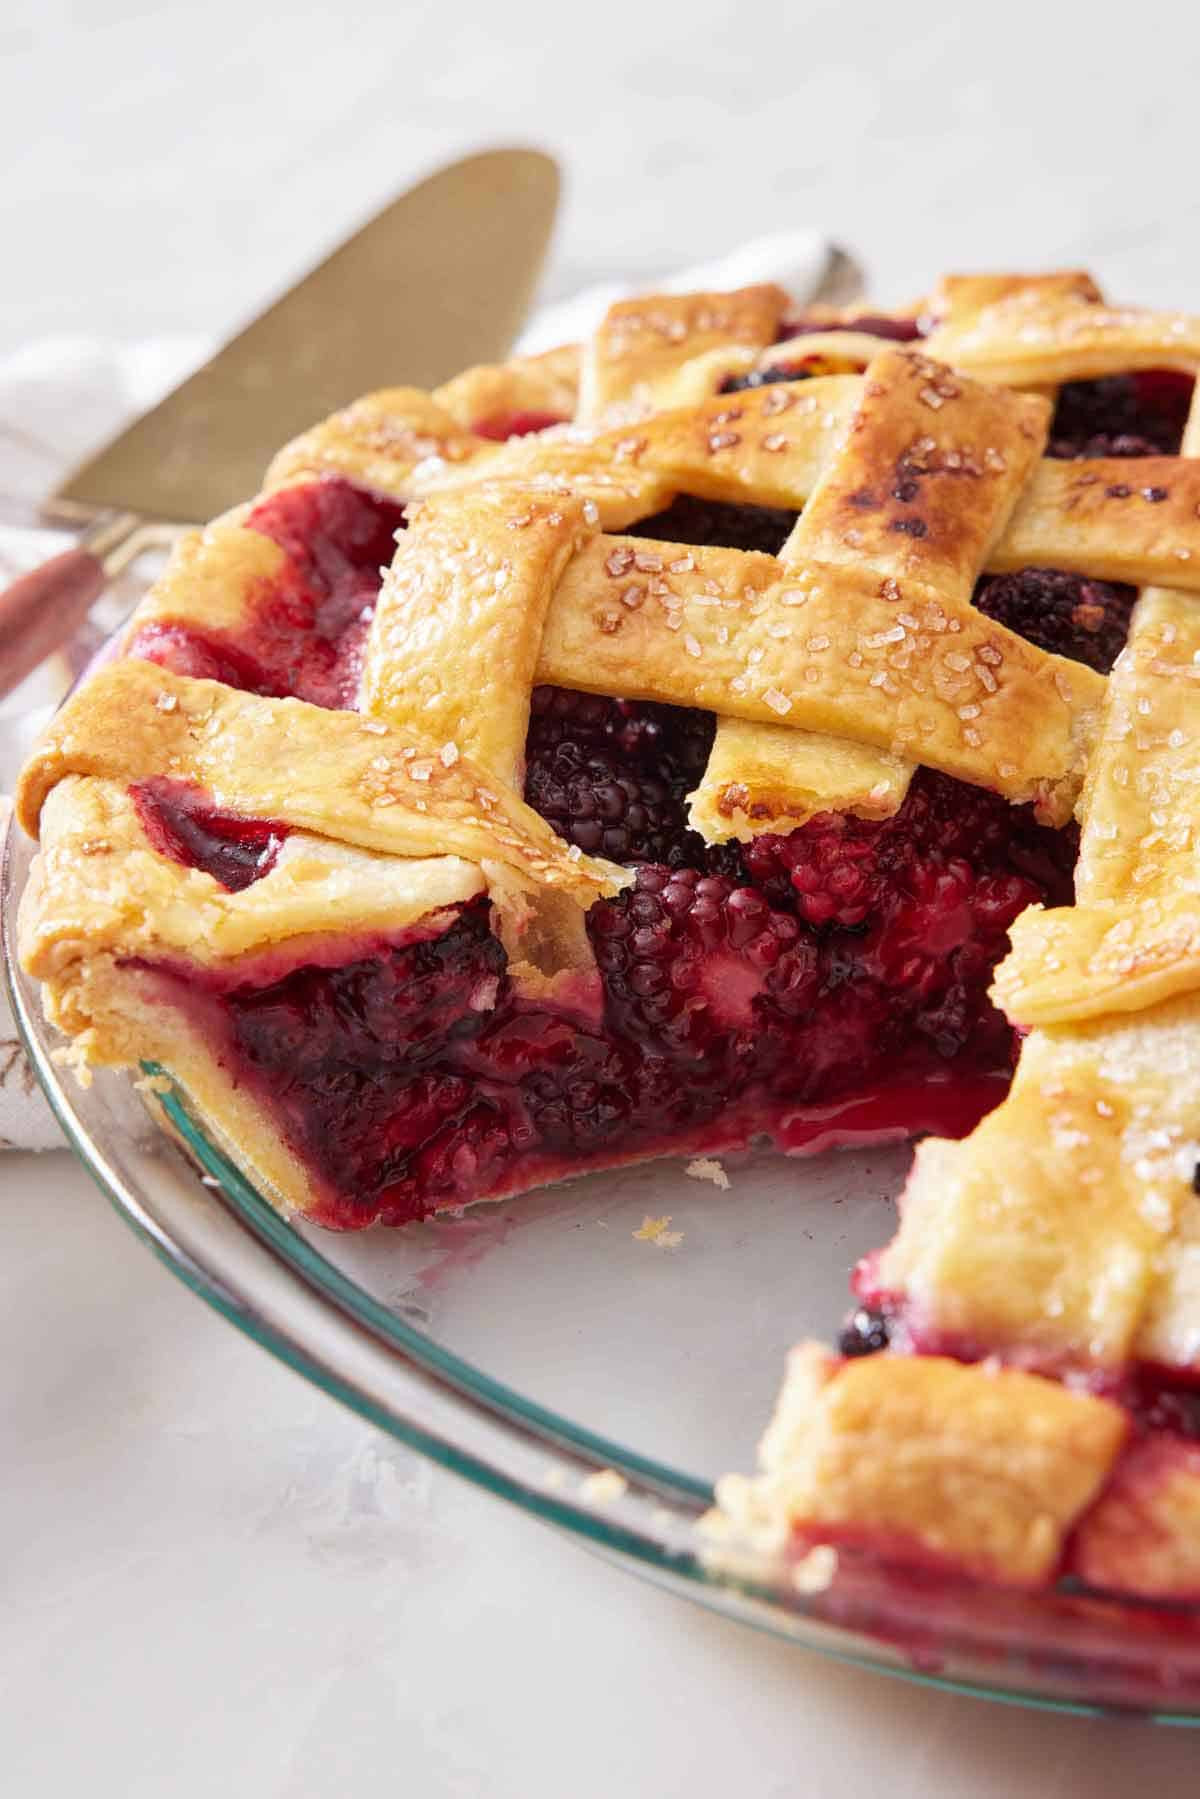 A close up view of a blackberry pie with a slice cut out, showing the berry-filled interior.